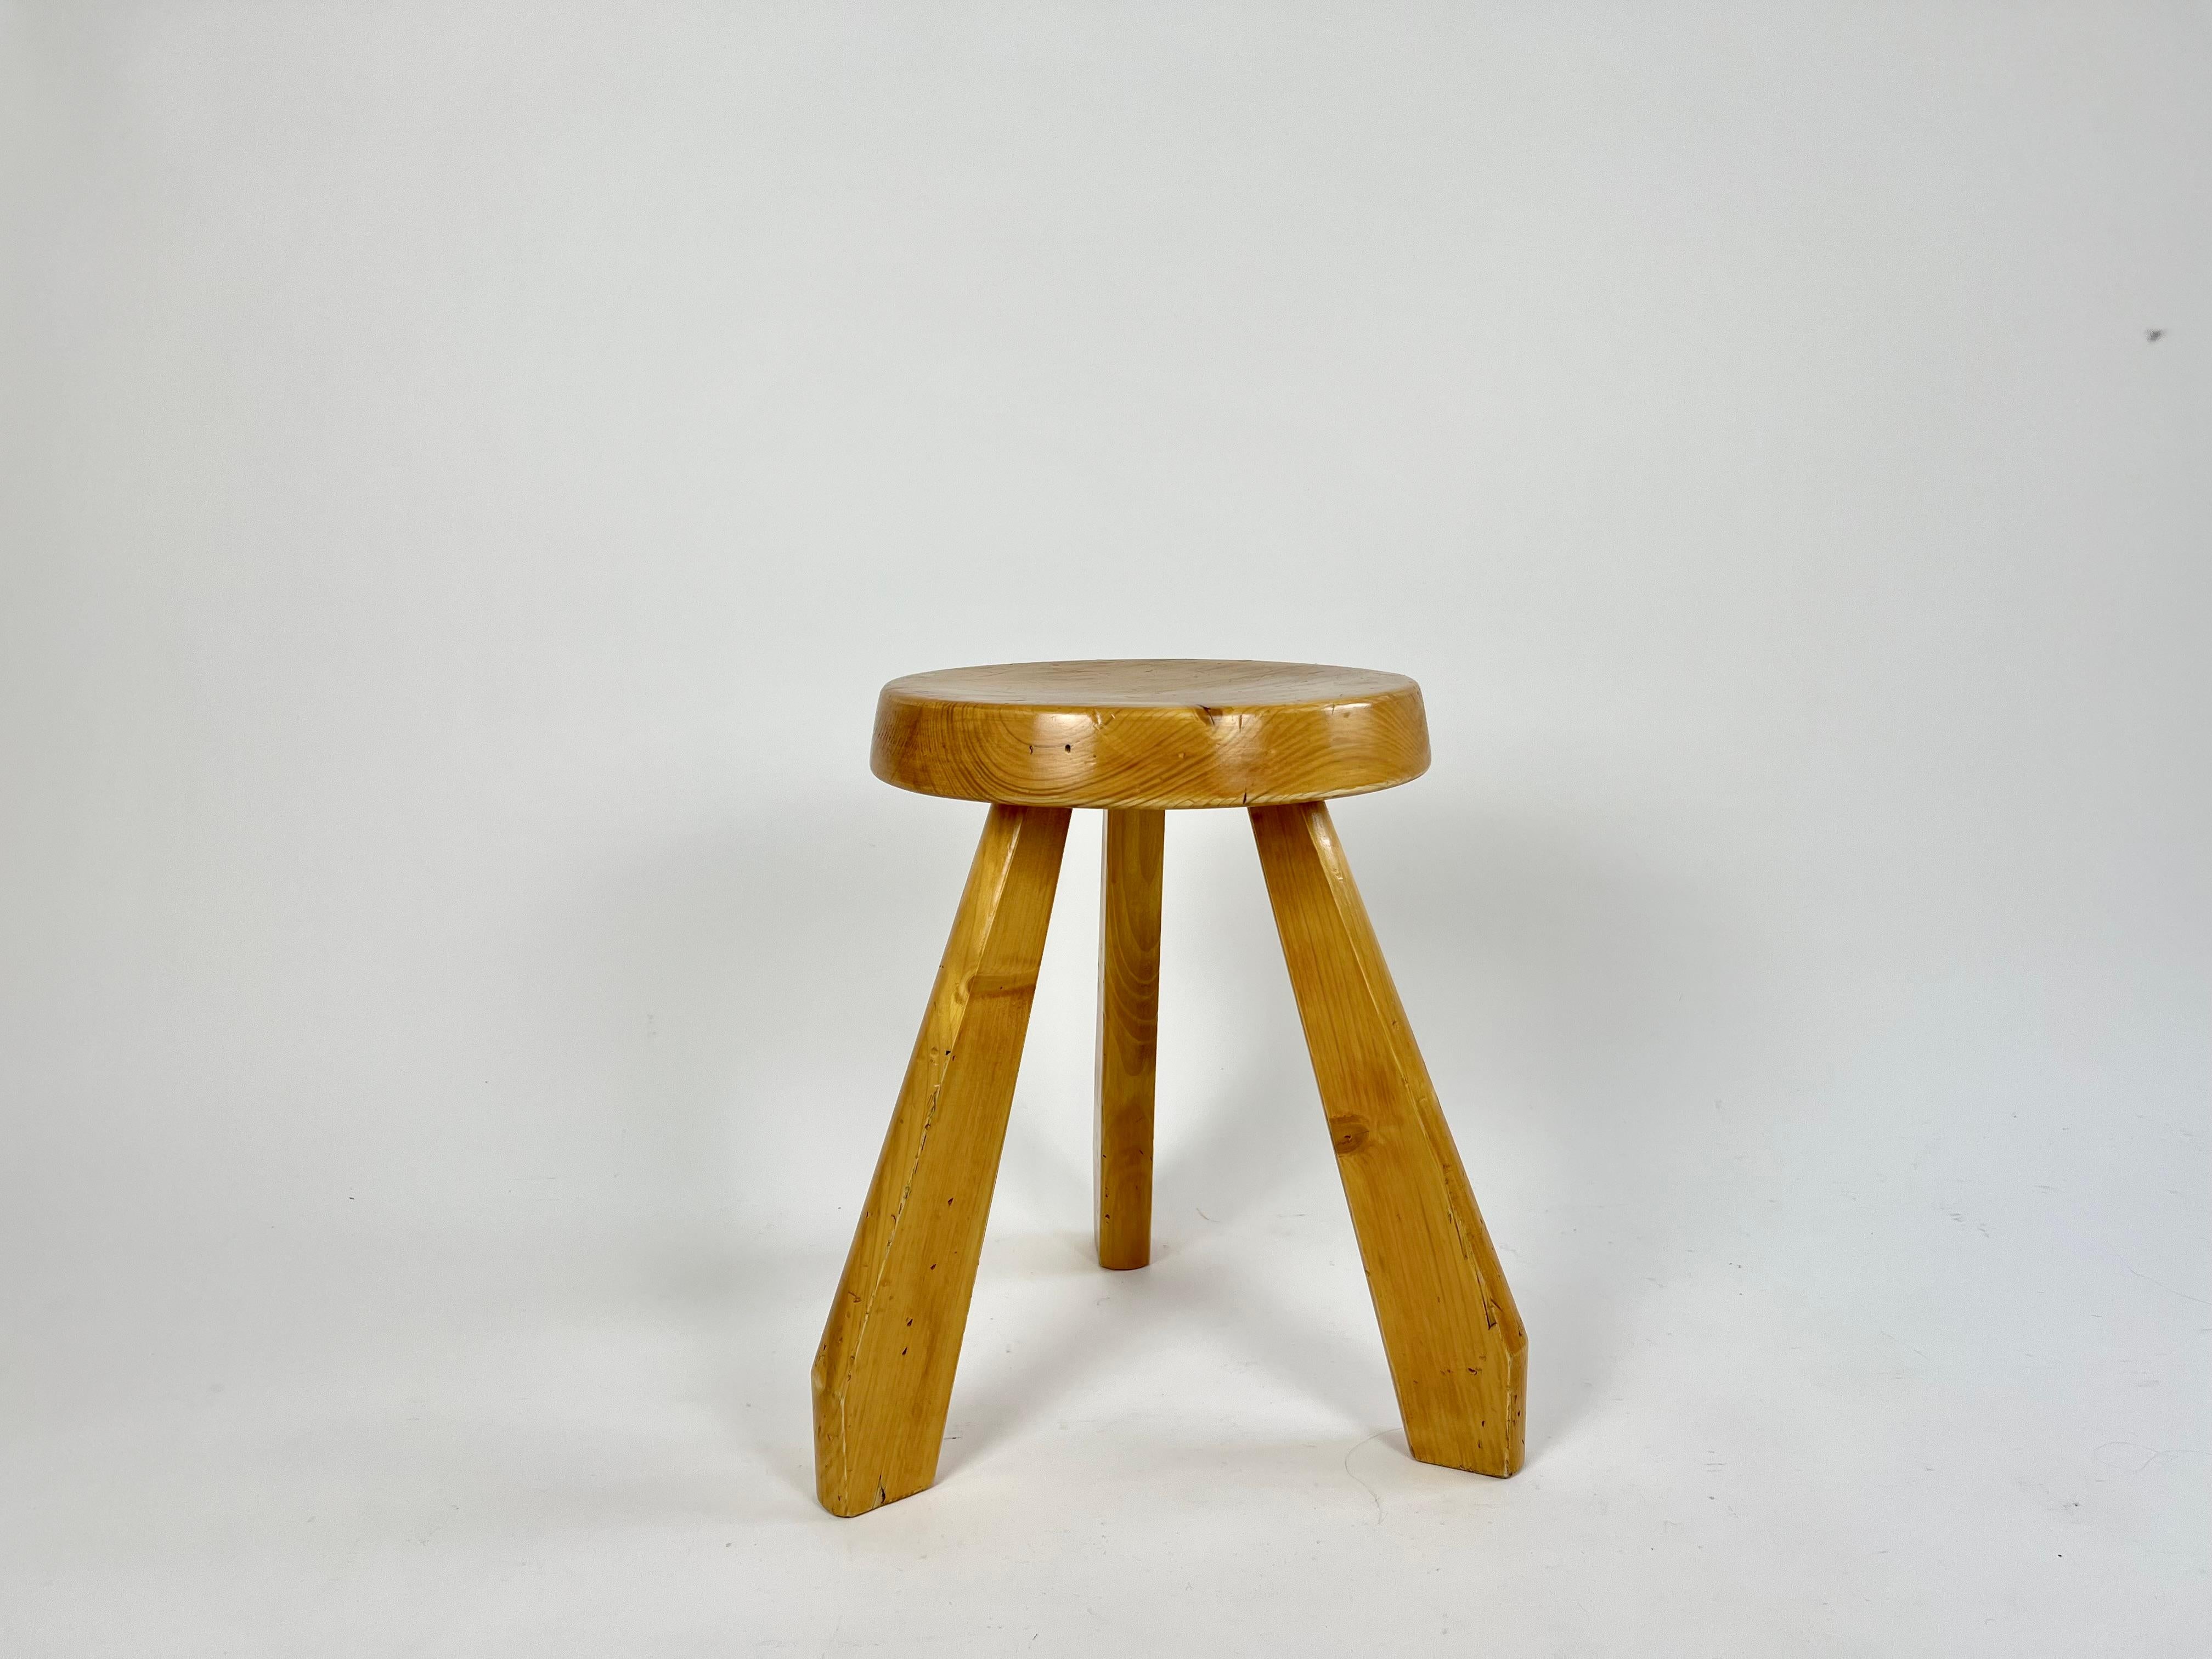 French Pine stool from Les Arcs, Charlotte Perriand, France 1960-70s For Sale